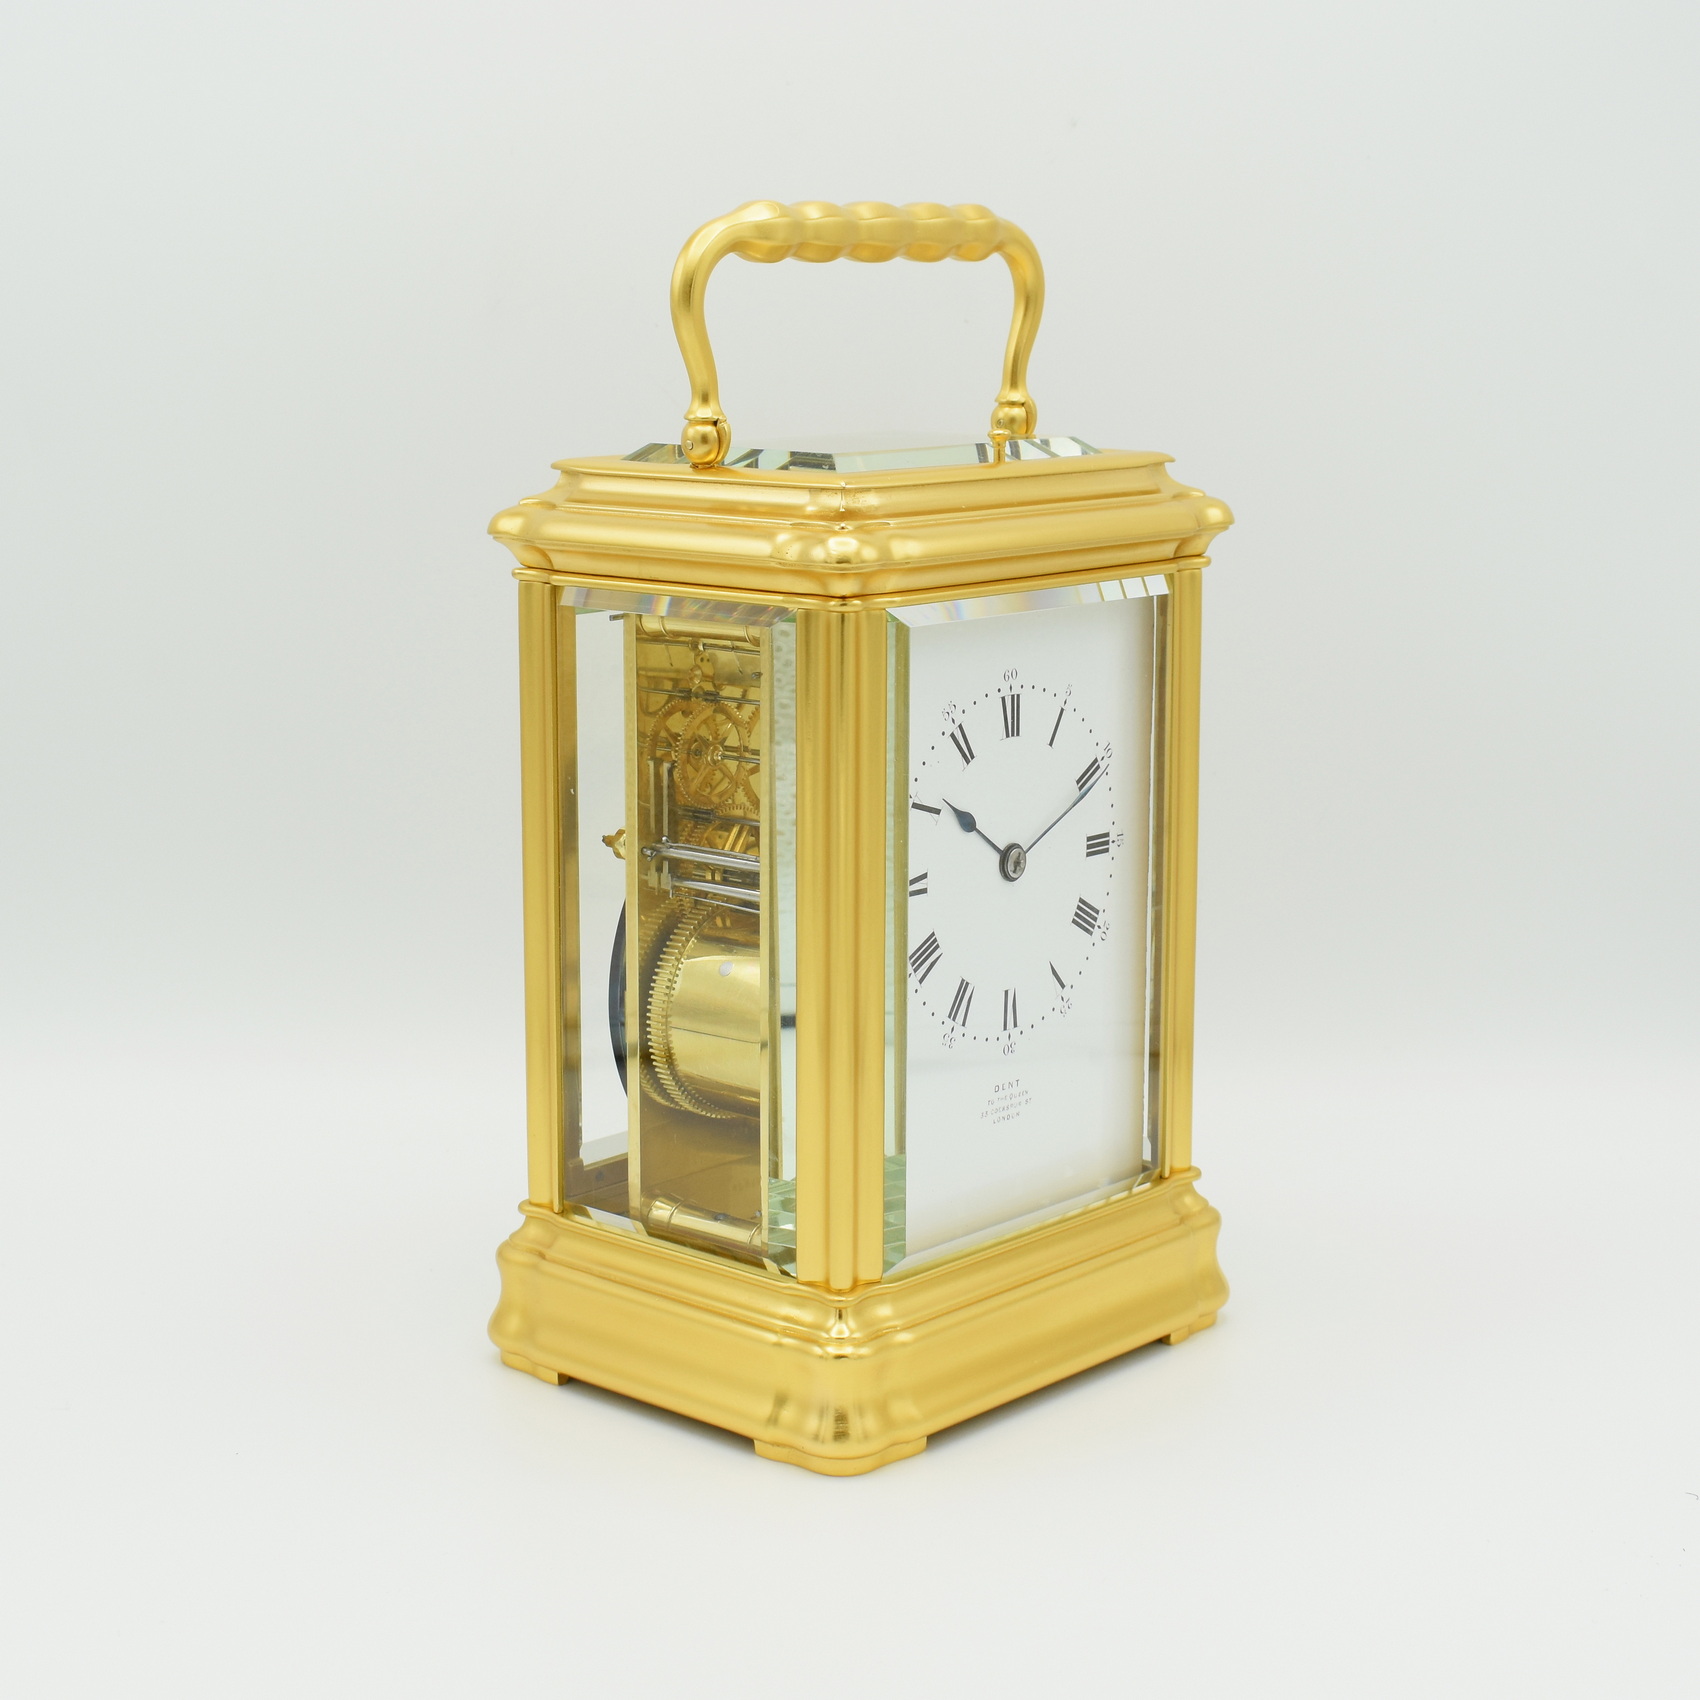 Rare Giant ‘Dent’ Carriage Clock – It's About Time